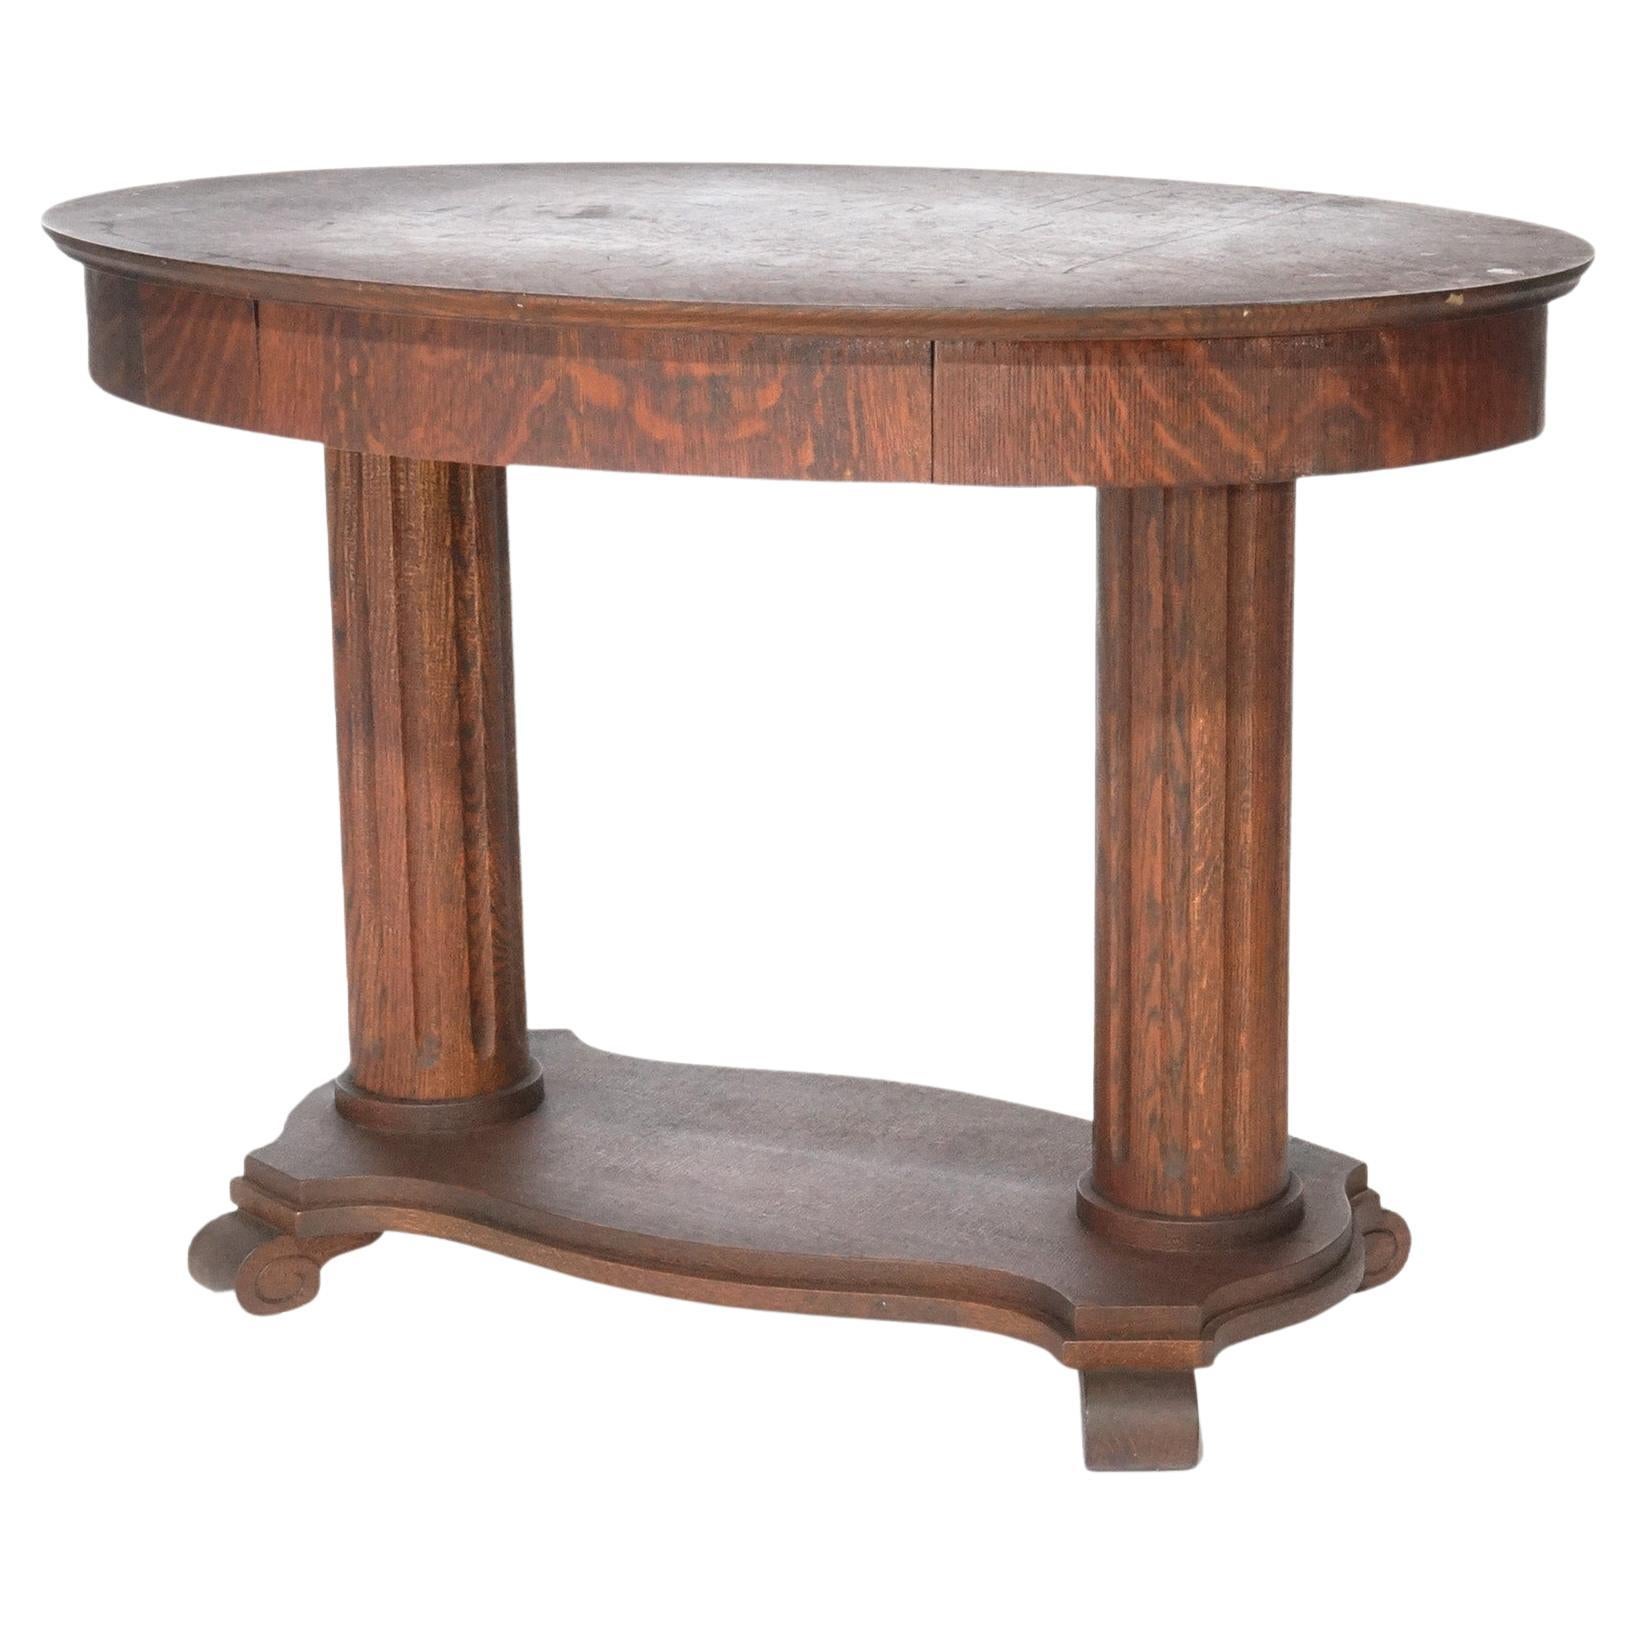 Antique Arts & Crafts Oval Oak Library Table circa 1910